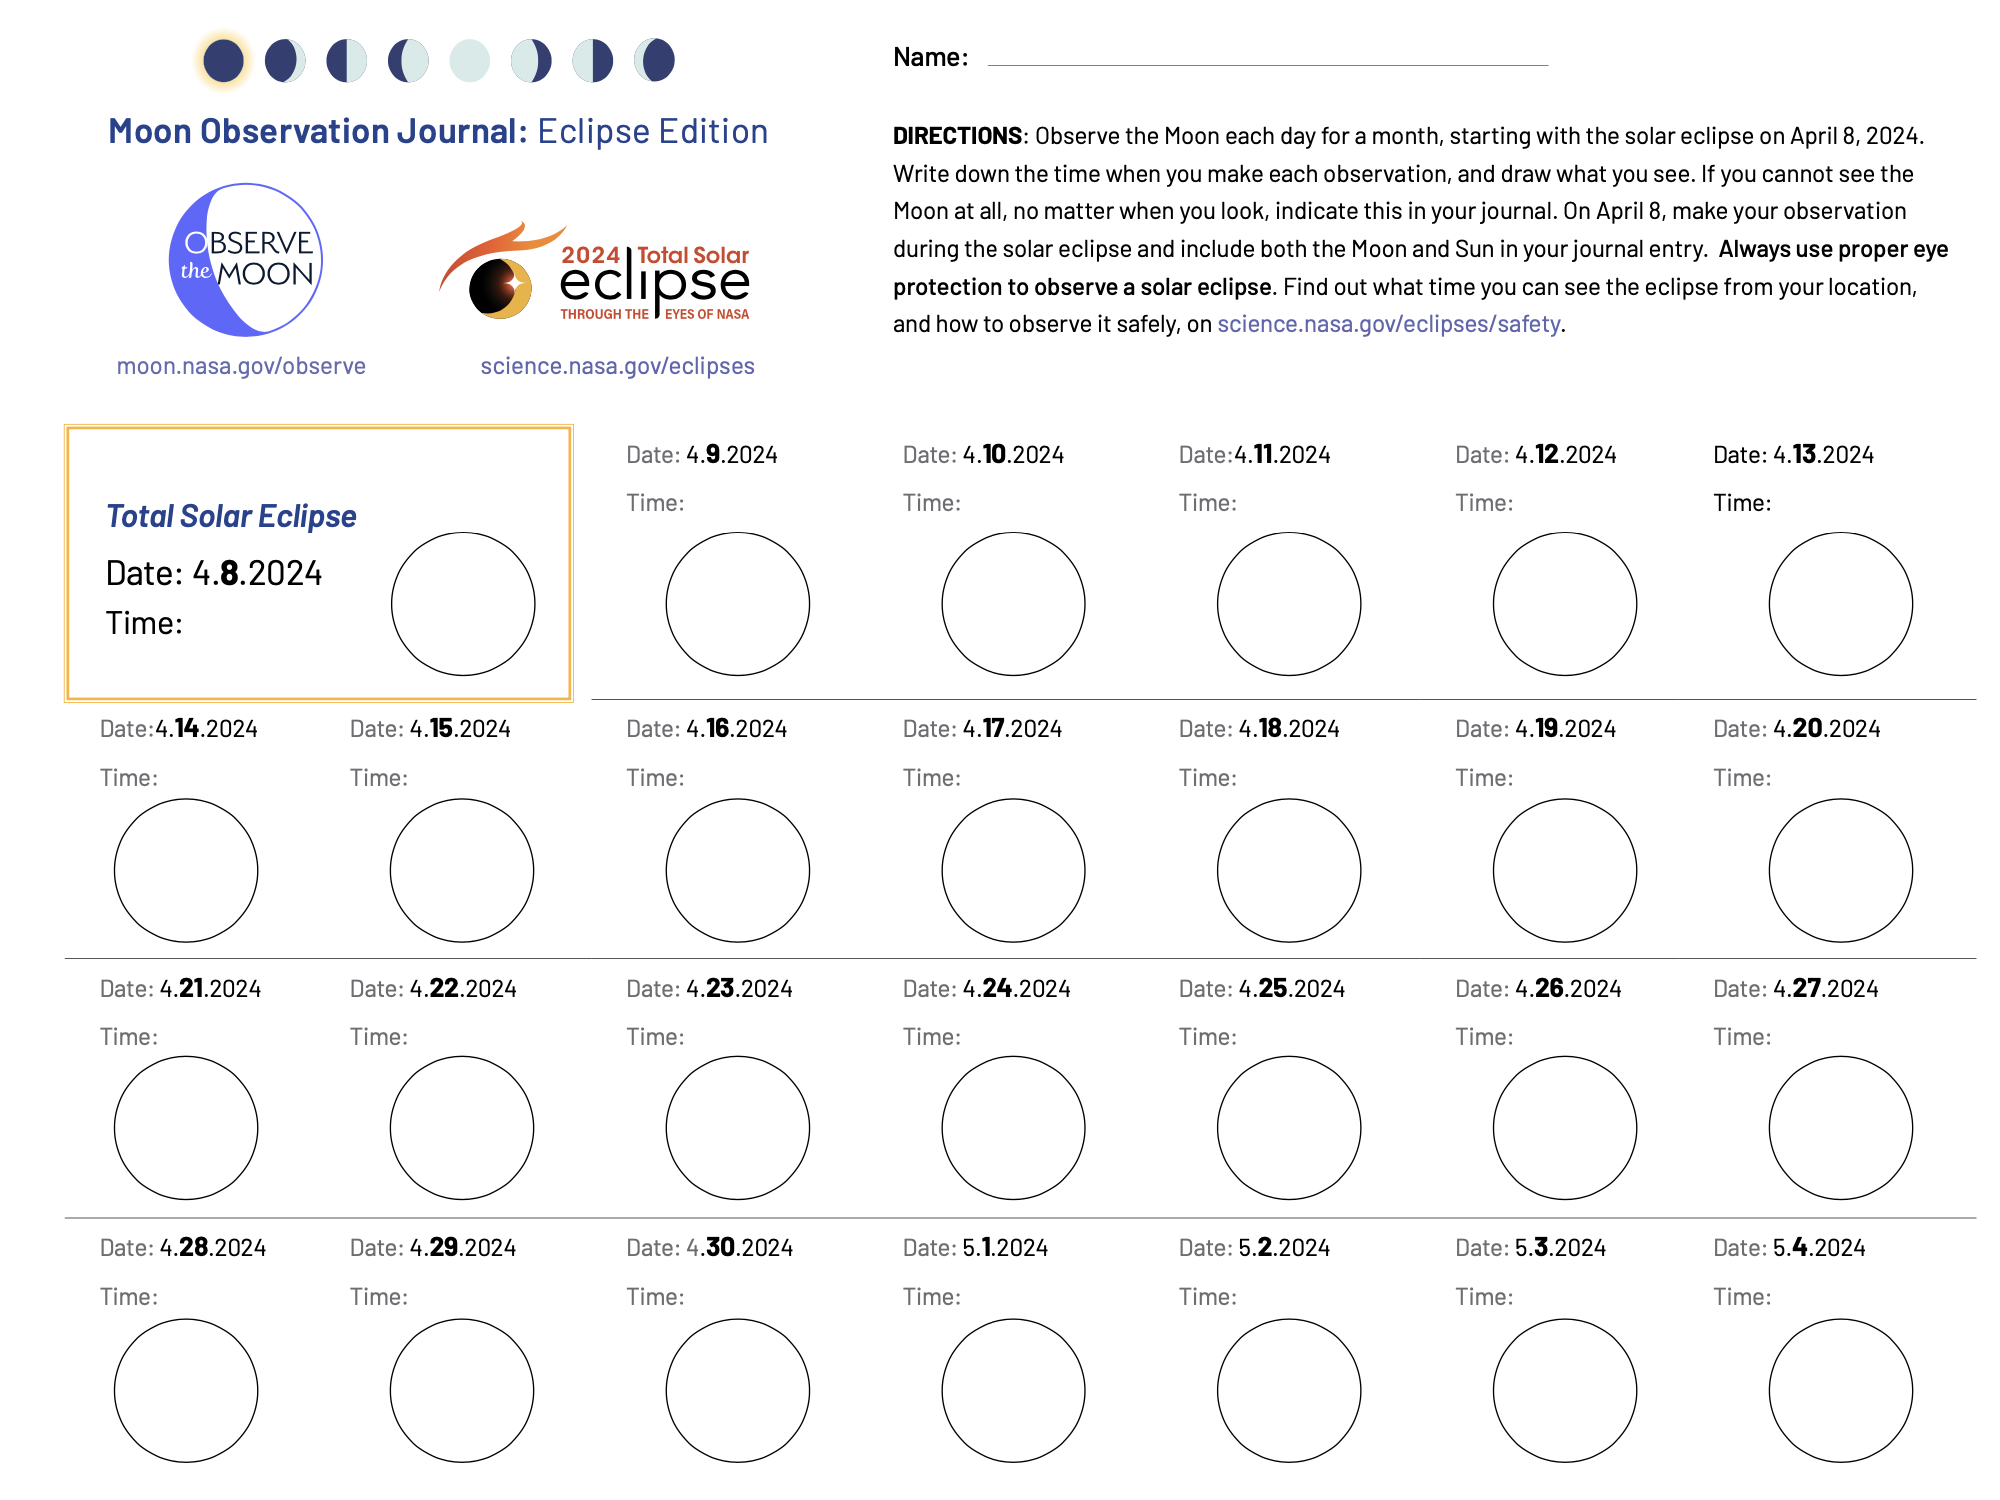 Grid of blank circles and banner graphic of an Eclipse and Moon.